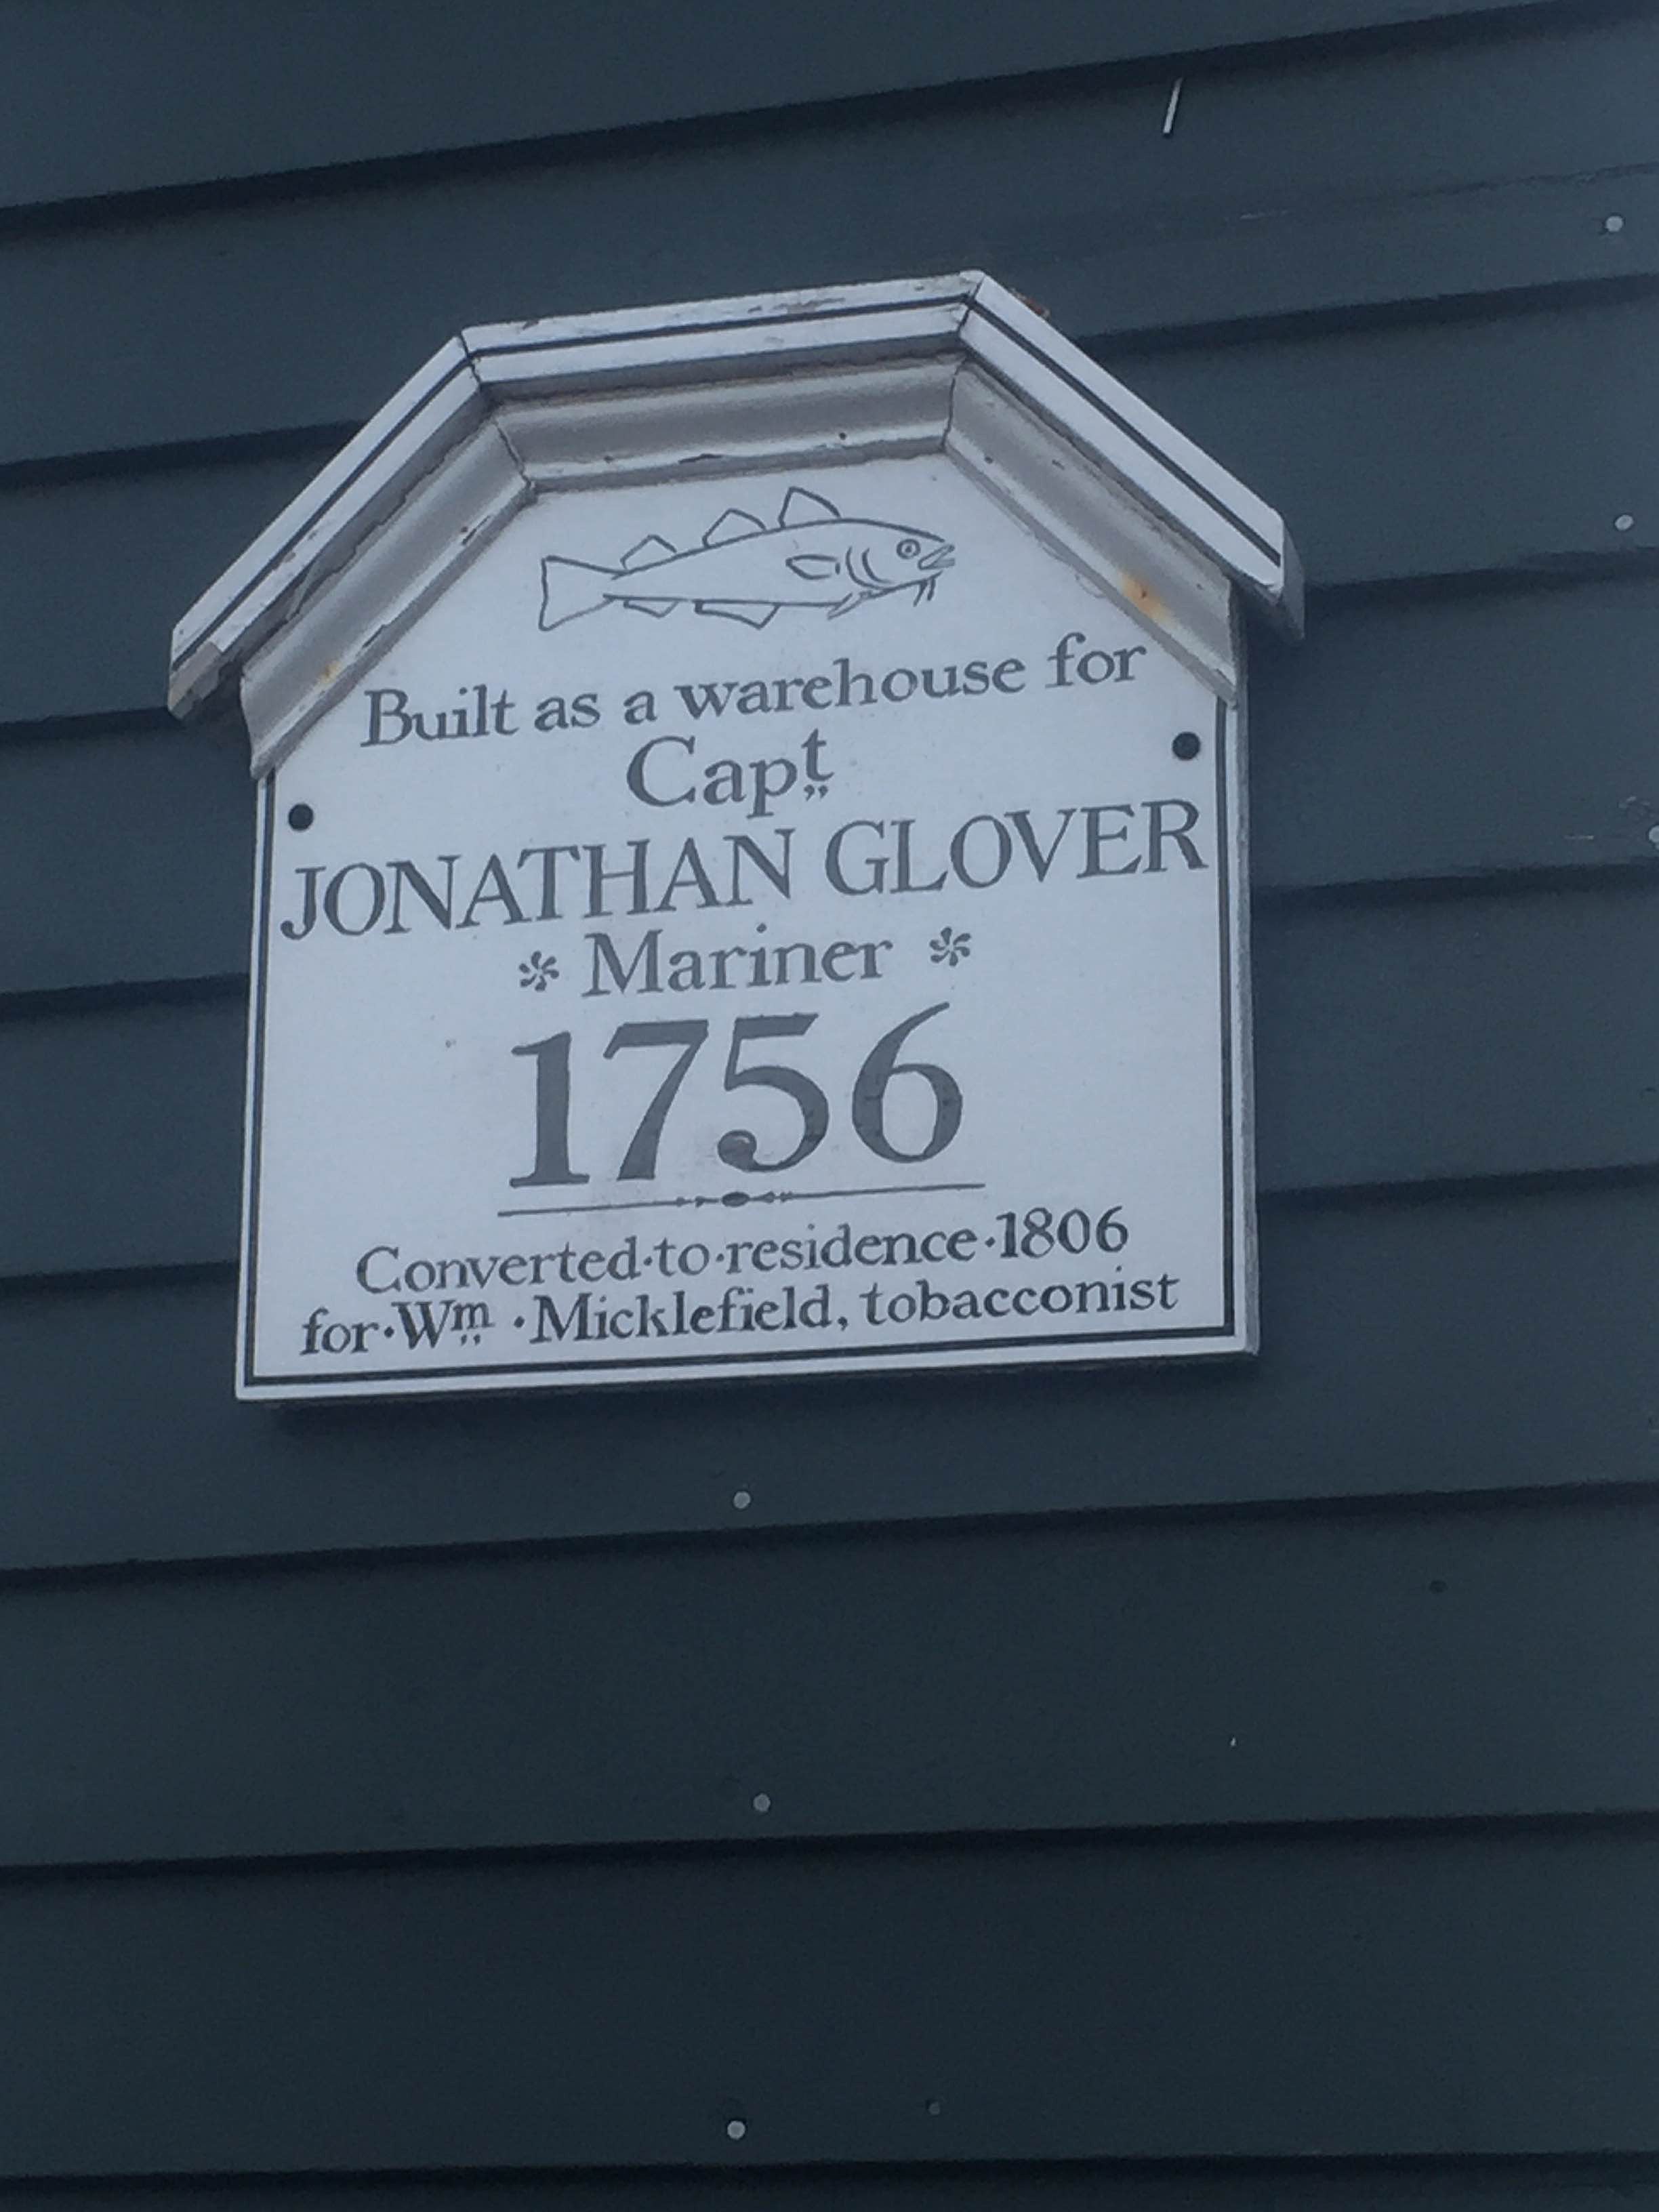 John Glover (November 5, 1732 – January 30, 1797) was an American fisherman, merchant, and military leader from Marblehead, Massachusetts, who served as a brigadier general in the Continental Army during the American Revolutionary War. Glover marched his regiment to join the siege of Boston in June 1775. At Boston, General George Washington chartered Glover's schooner Hannah to raid British supply vessels, the first of many privateers or warship authorized by Washington. After Washington lost the Battle of Long Island (aka Battle of Brooklyn) in August 1776, Glover's Marbleheaders evacuated the army across the East River to Manhattan Island in a surprise nighttime operation, saving them from being entrapped in their fortified trenches on Brooklyn Heights. In subsequent actions of the New York campaign the regiment fought well against the British at Kip's Bay when the Redcoats invaded landing on Manhattan and Pell's Point. The last action of the regiment was its most famous: ferrying Washington's army on confiscated river coal ore boats from upstream across the Delaware River at night for a surprise attack on German Hessian allied mercenaries at Trenton in New Jersey on Christmas night, the morning of December 26, 1776. 